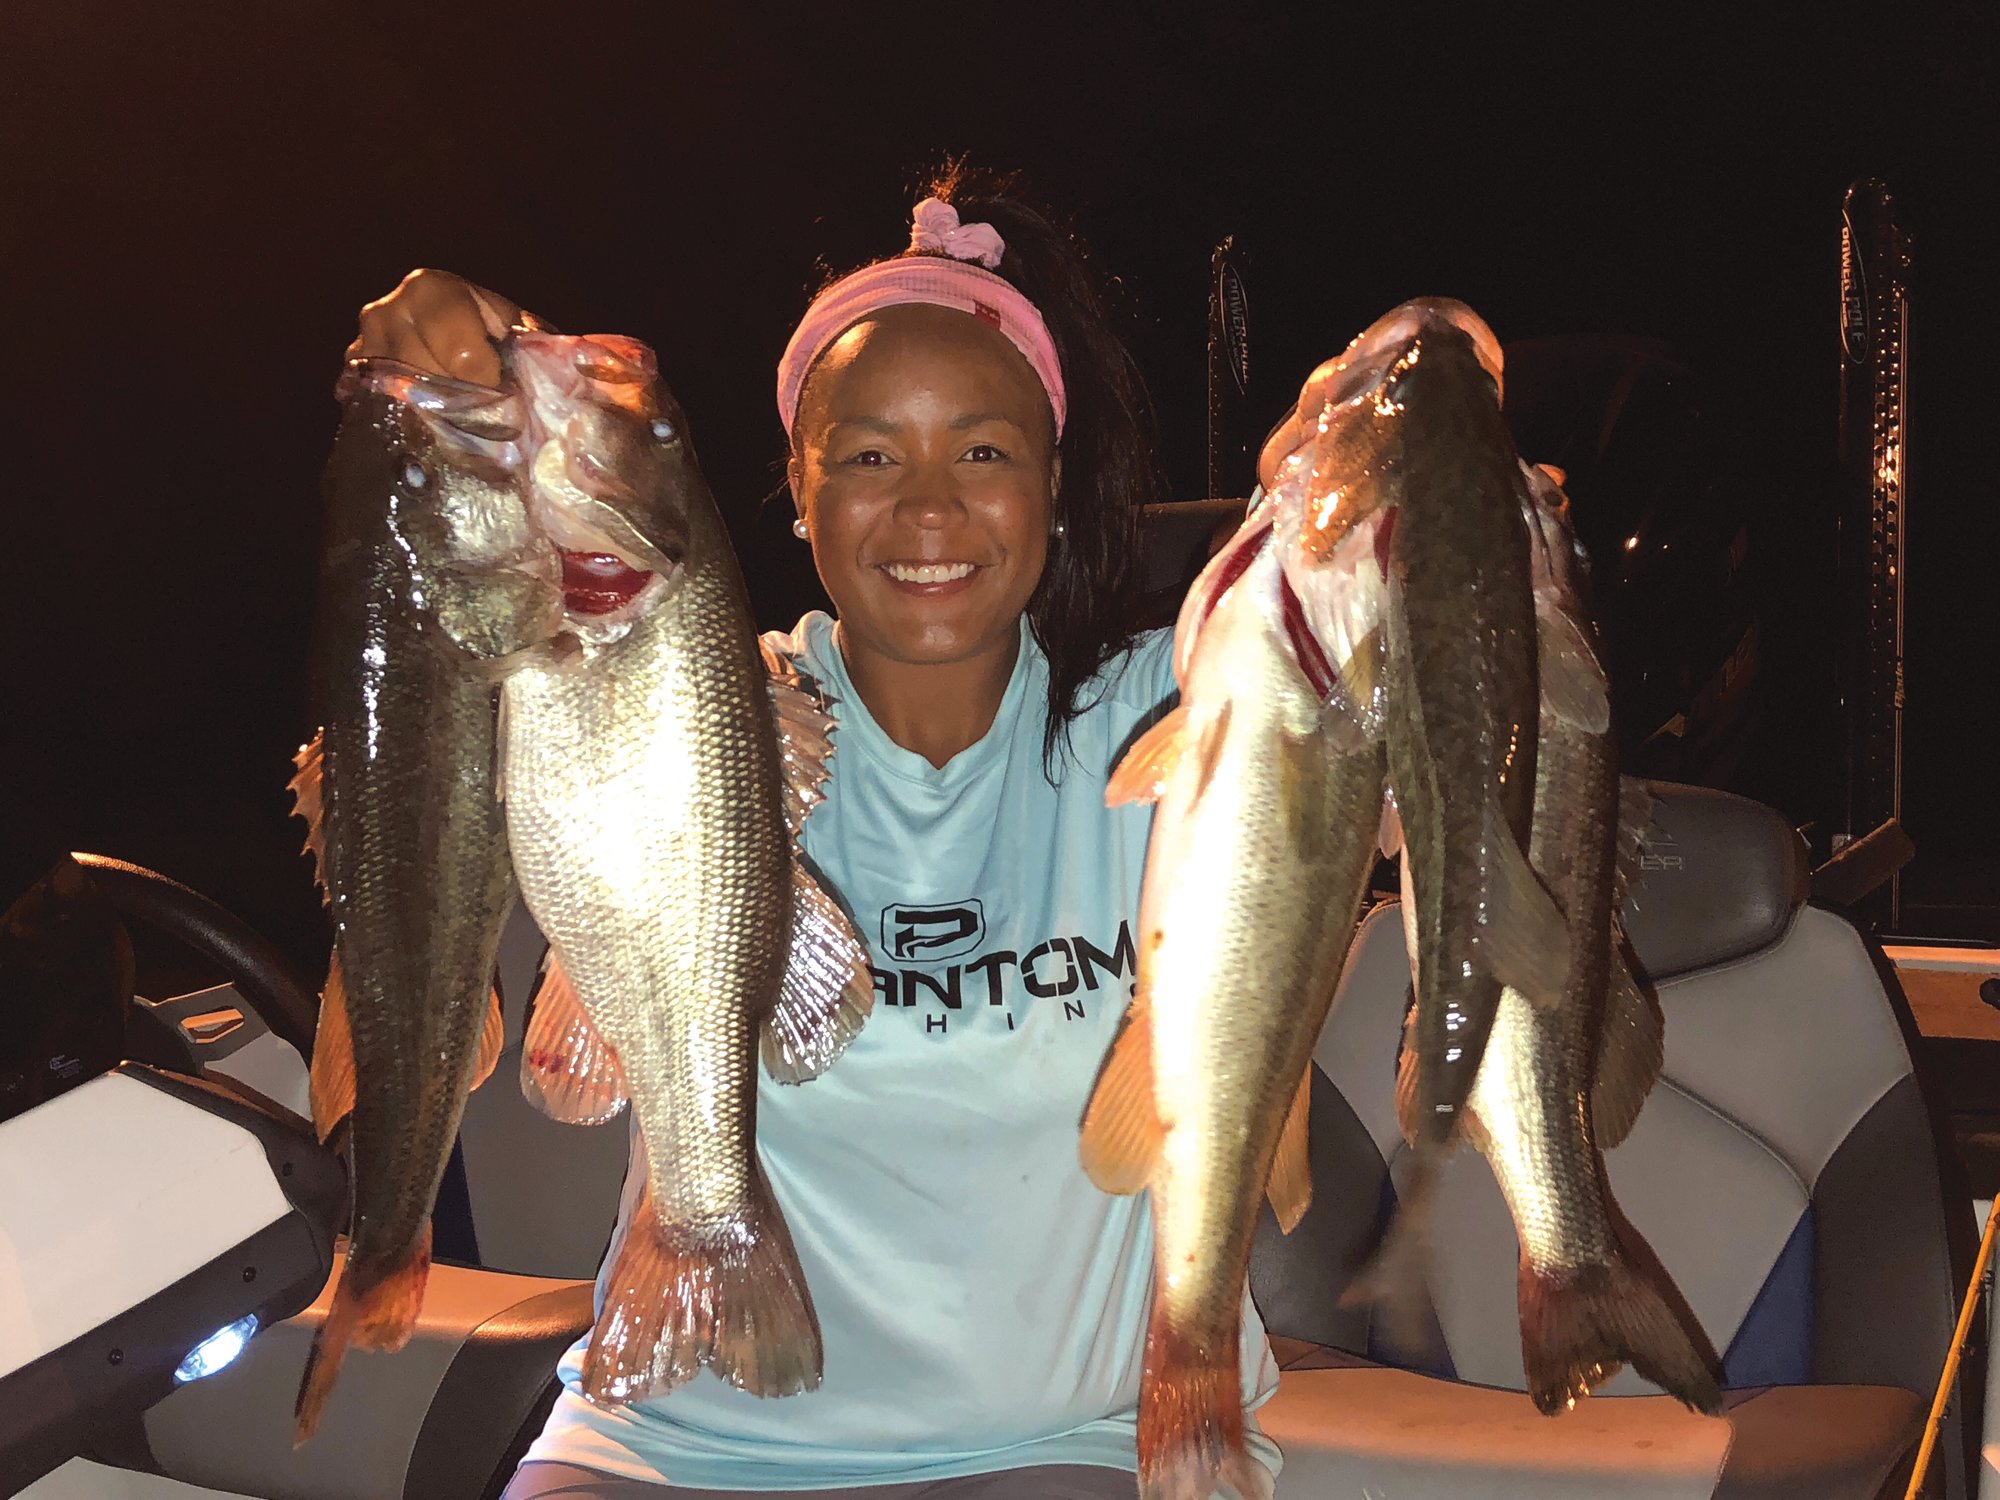 26-year-old female angler from Sumter makes cover of Bassmaster